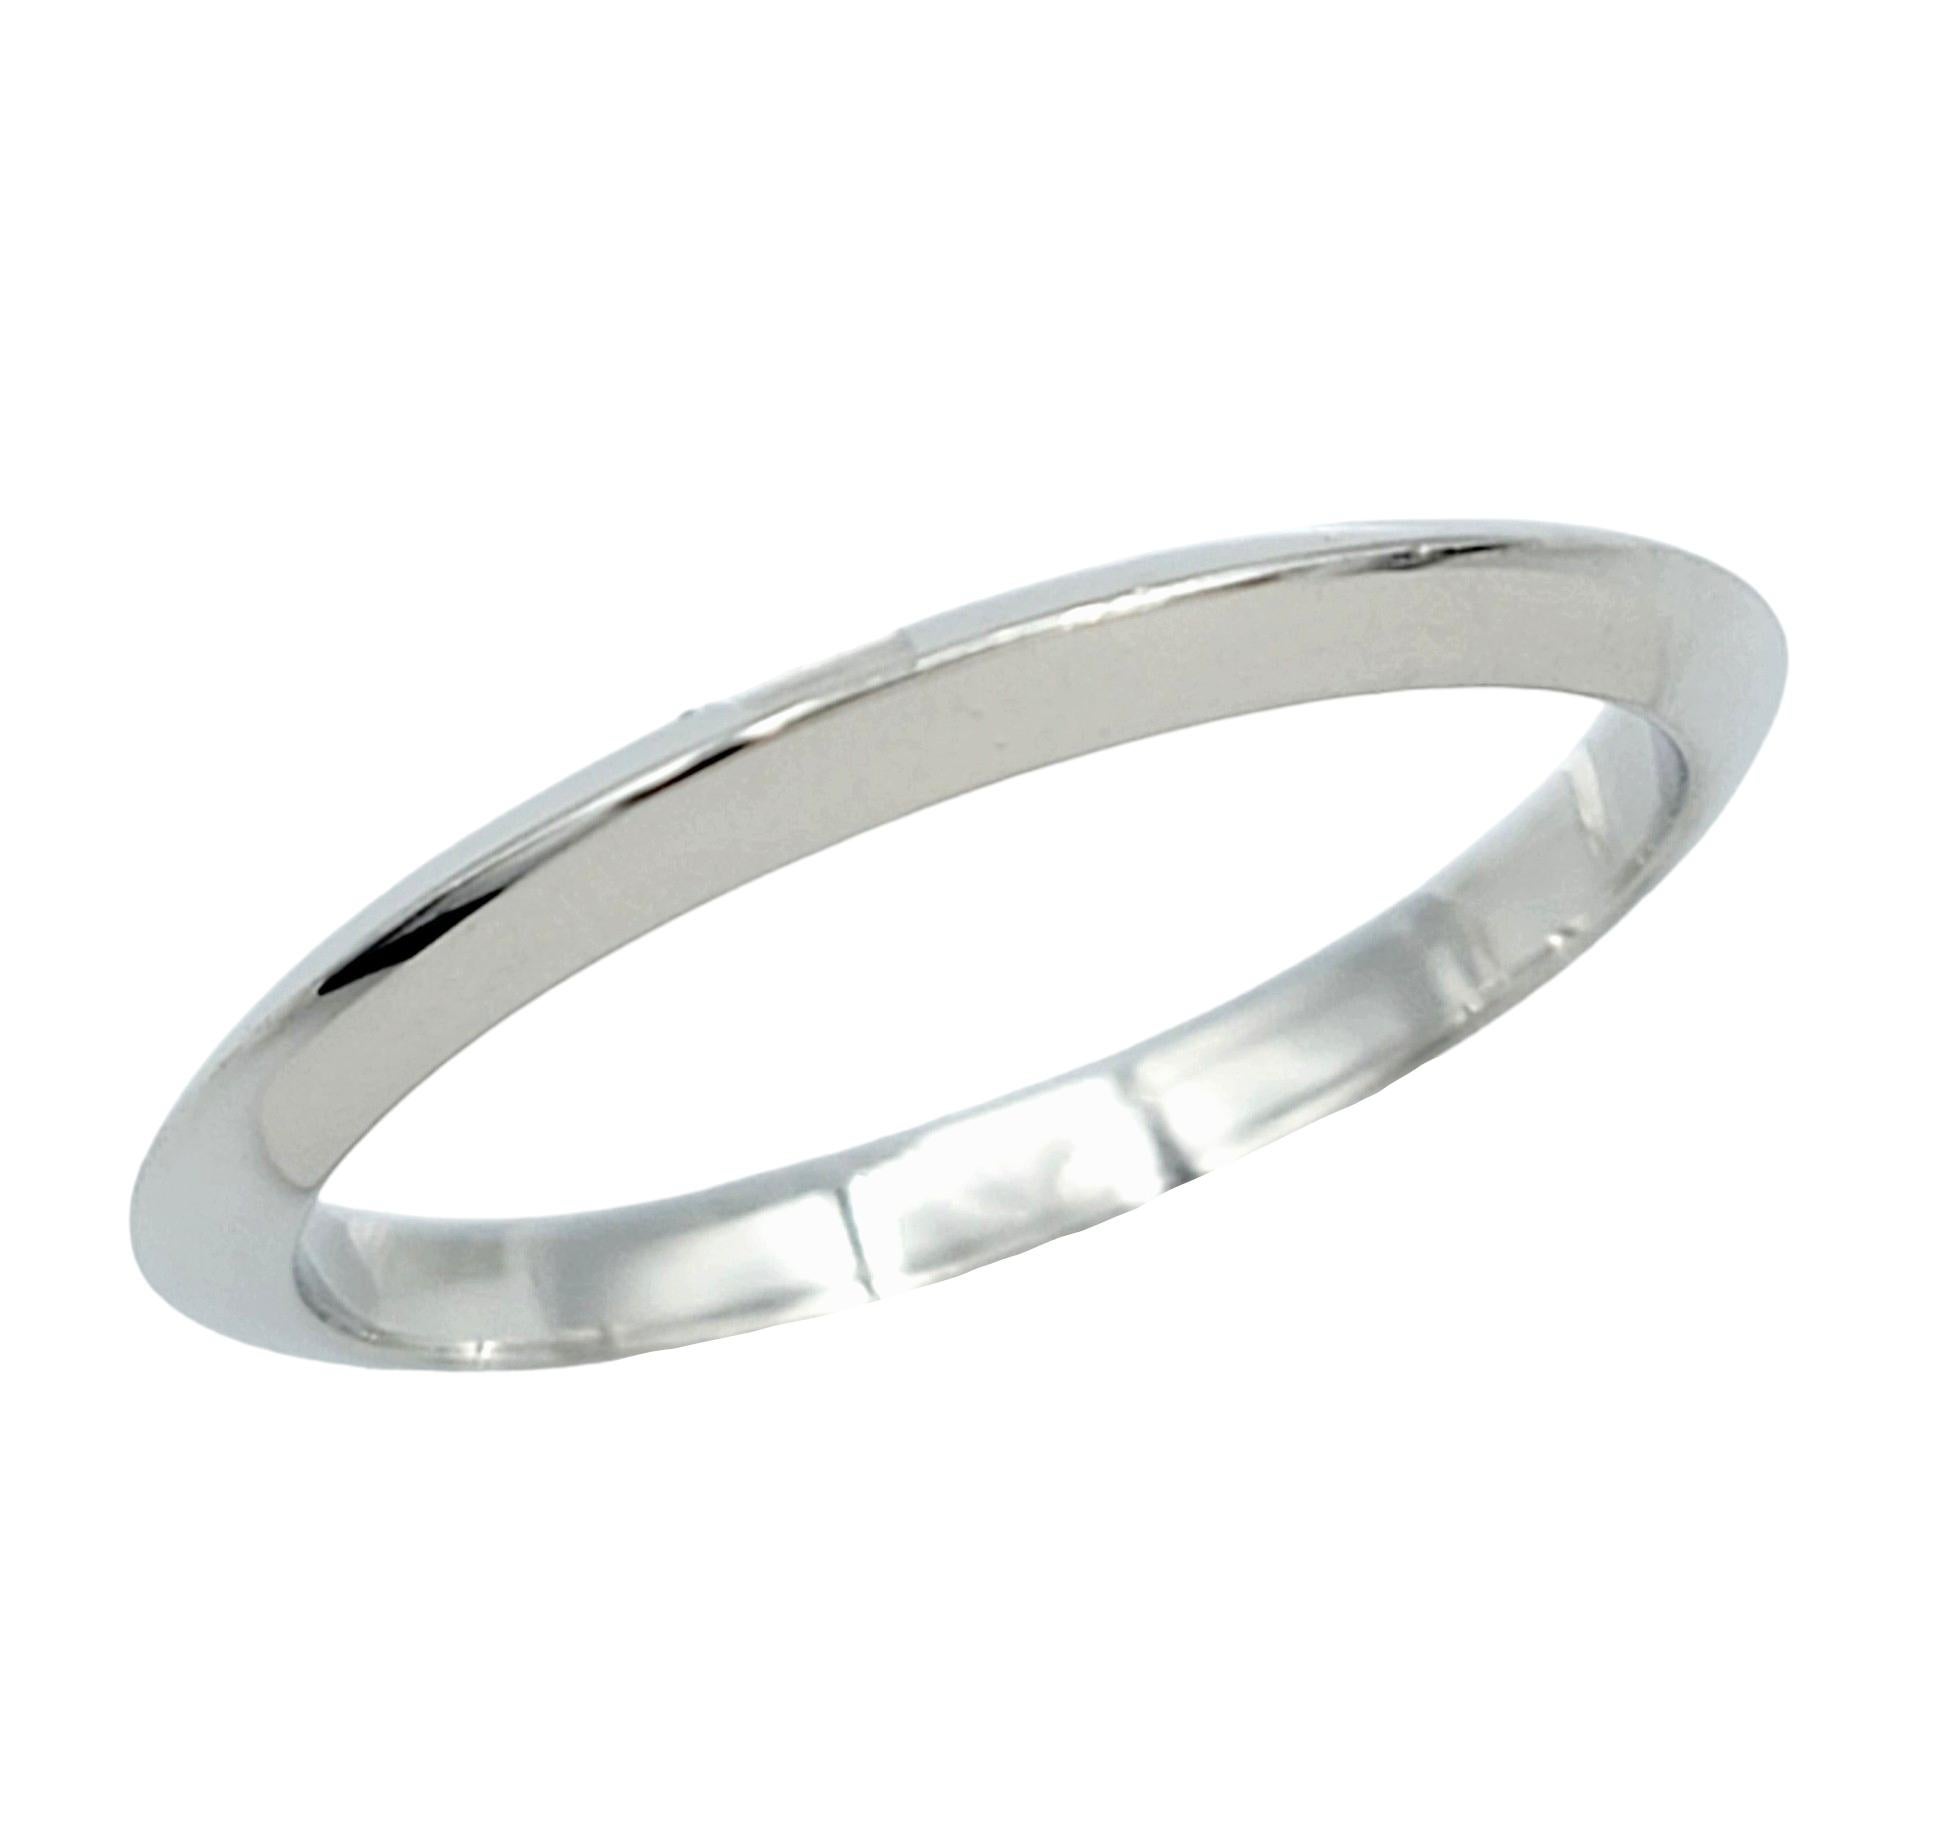 Ring Size: 6

Elegance meets simplicity in this timeless Tiffany & Co. band ring crafted from luxurious platinum. The 2 mm width of the ring provides a delicate presence on the finger, while the high-polish finish accentuates the inherent luster of